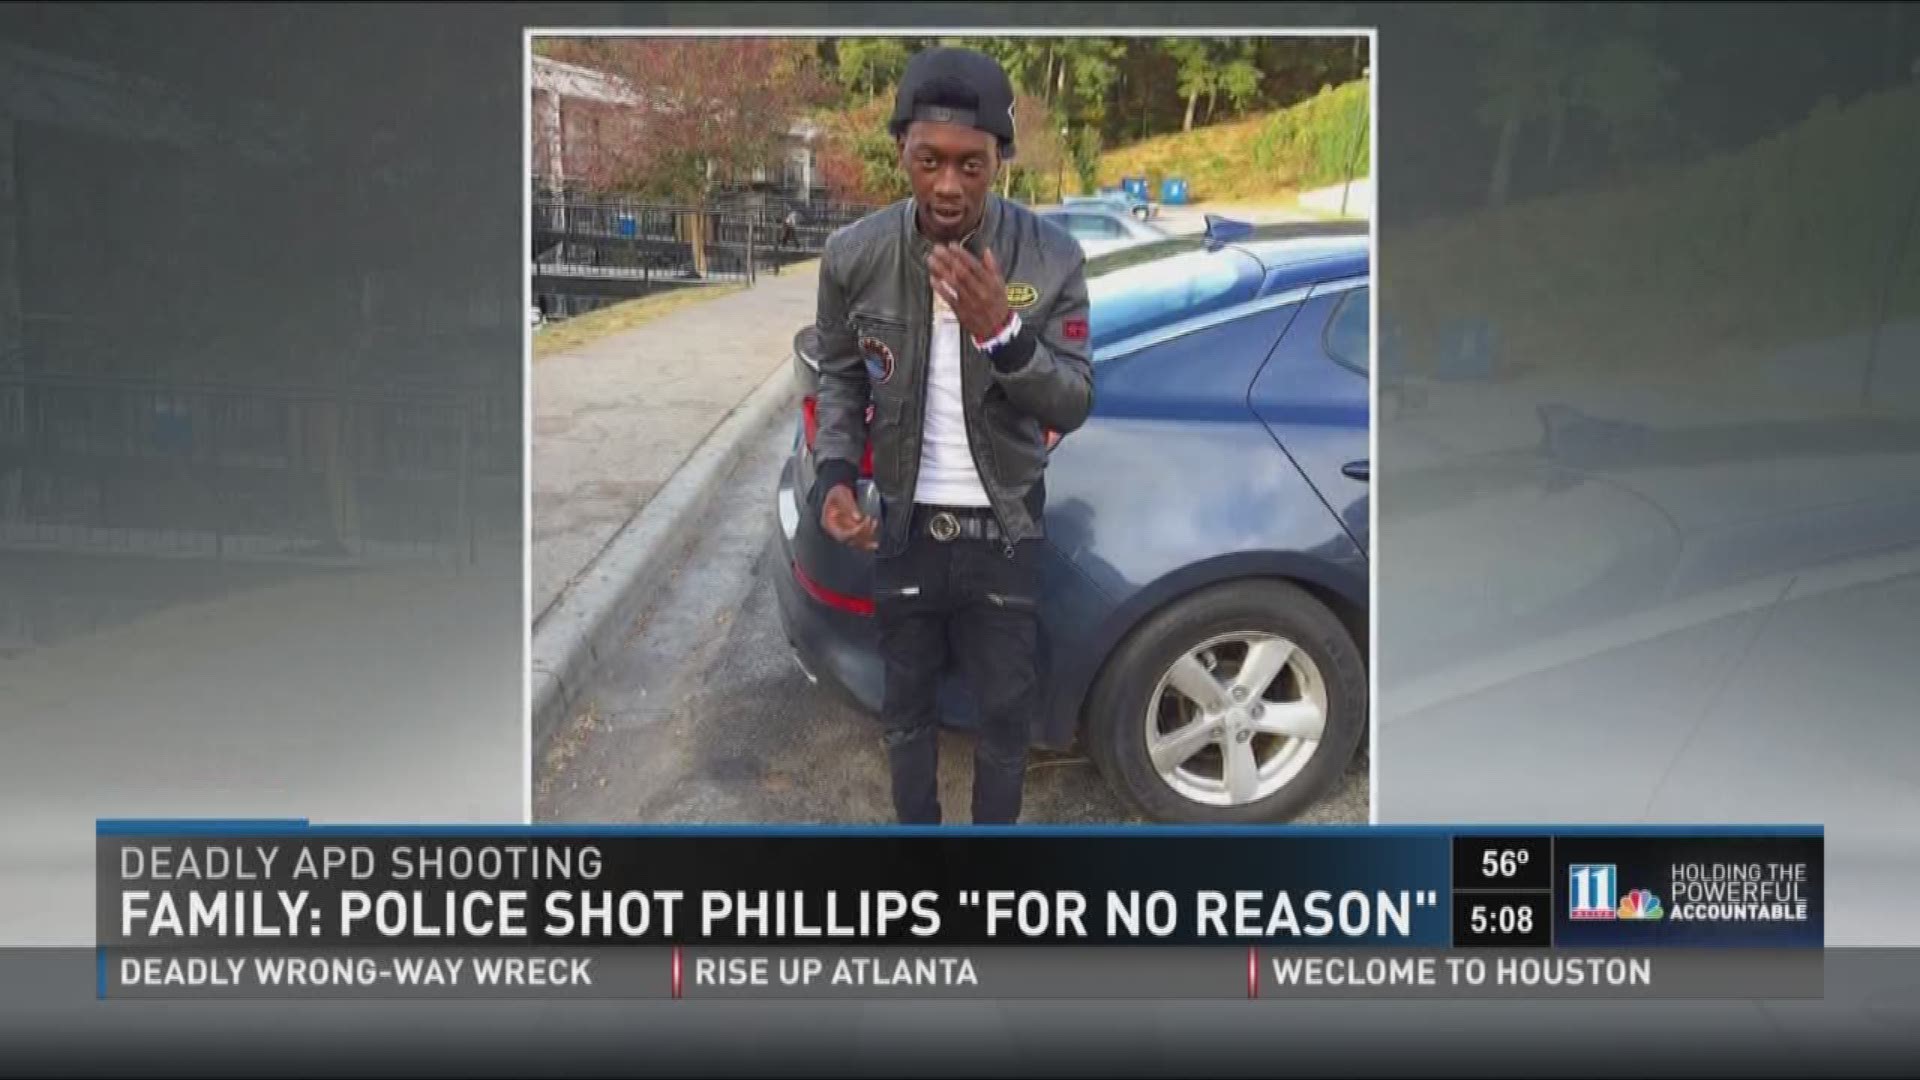 Family: Police shot Phillips 'for no reason'